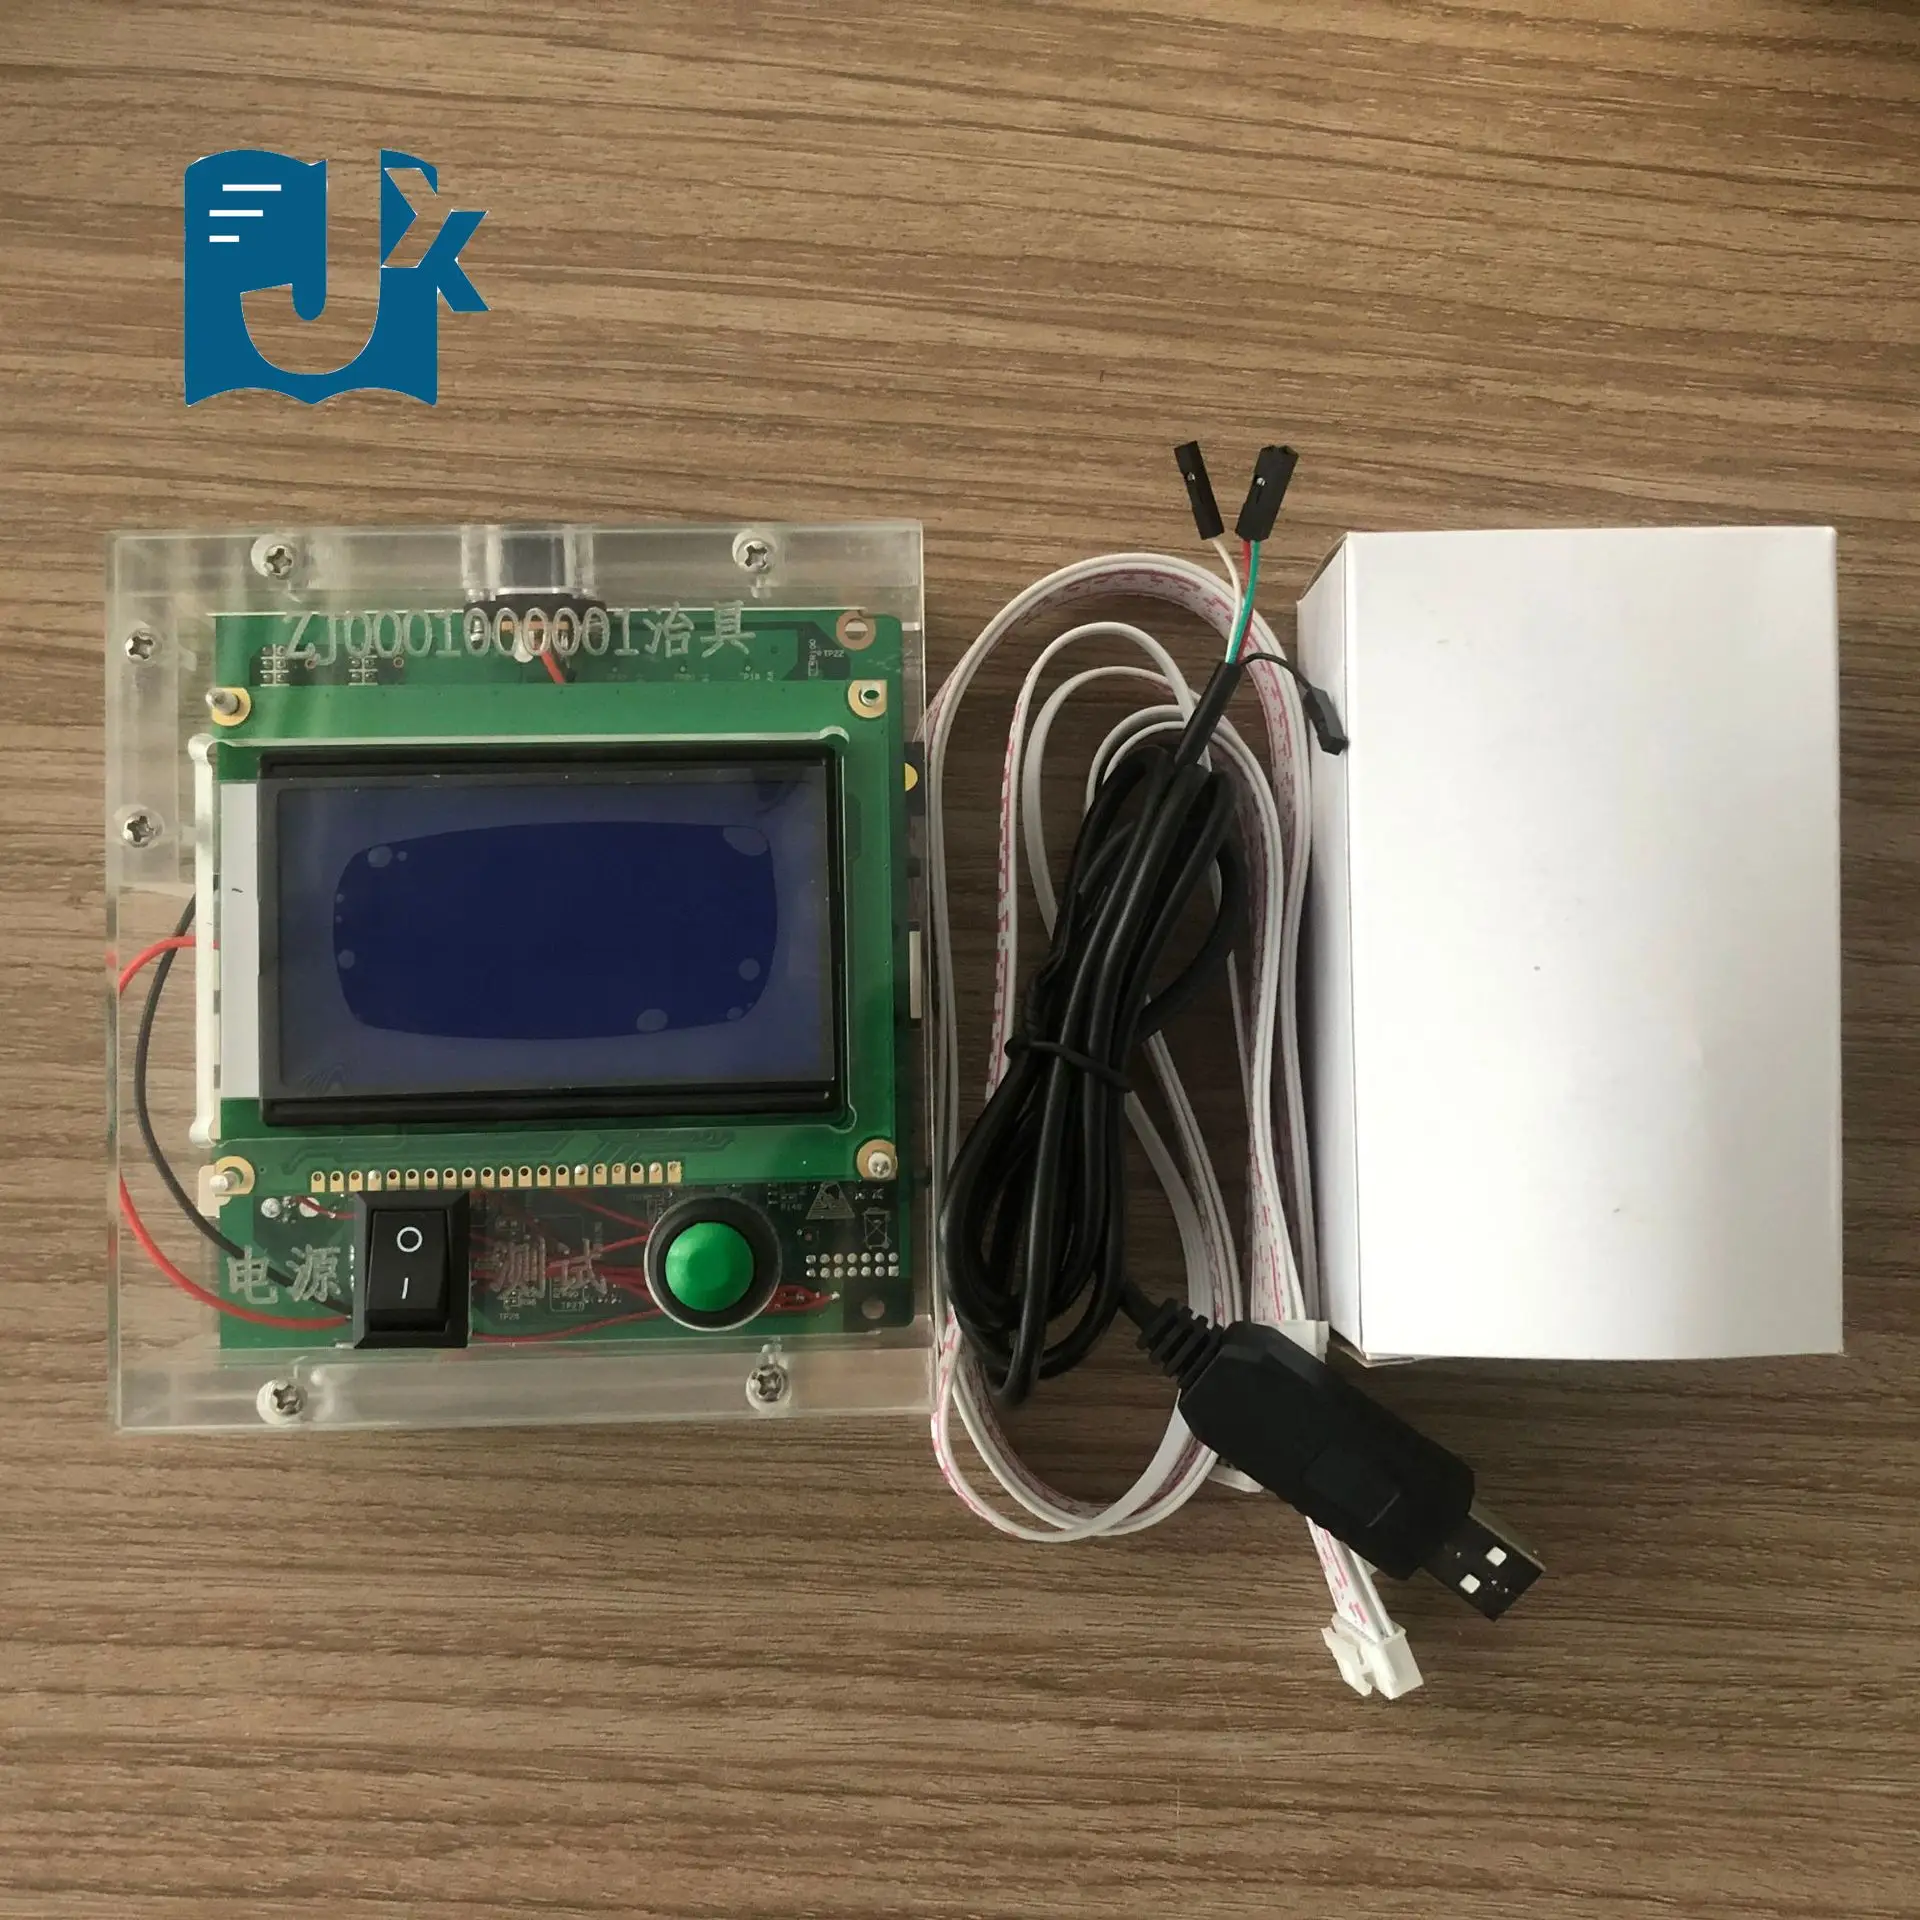 2.1 Universal Tester General for Aсик S9/T9/S11/S15/S17/T17/S9K/S9SE/S17+/S17E/S17PRO/T17E/T17+/S19/T19 HashBoard Test Fixture